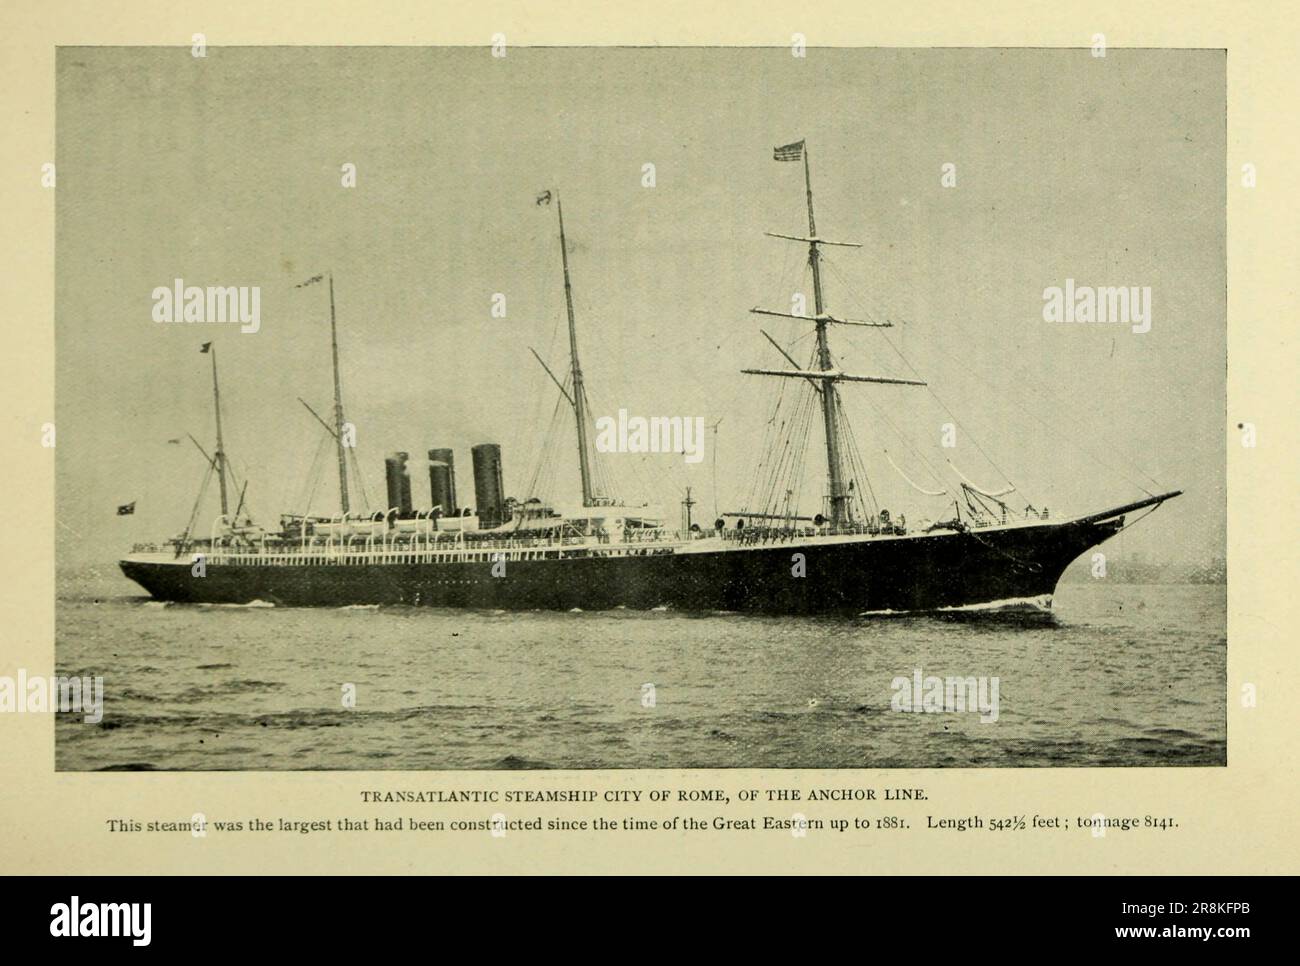 Anchor Line Transatlantic Steamship ' City of Rome ' 1881 Length 542 feet tonnage 8141 from the Article The Great Modern Transatlantic Steamships By Samuel Ward Stanton from The Engineering Magazine DEVOTED TO INDUSTRIAL PROGRESS Volume X October 1896 NEW YORK The Engineering Magazine Co Stock Photo